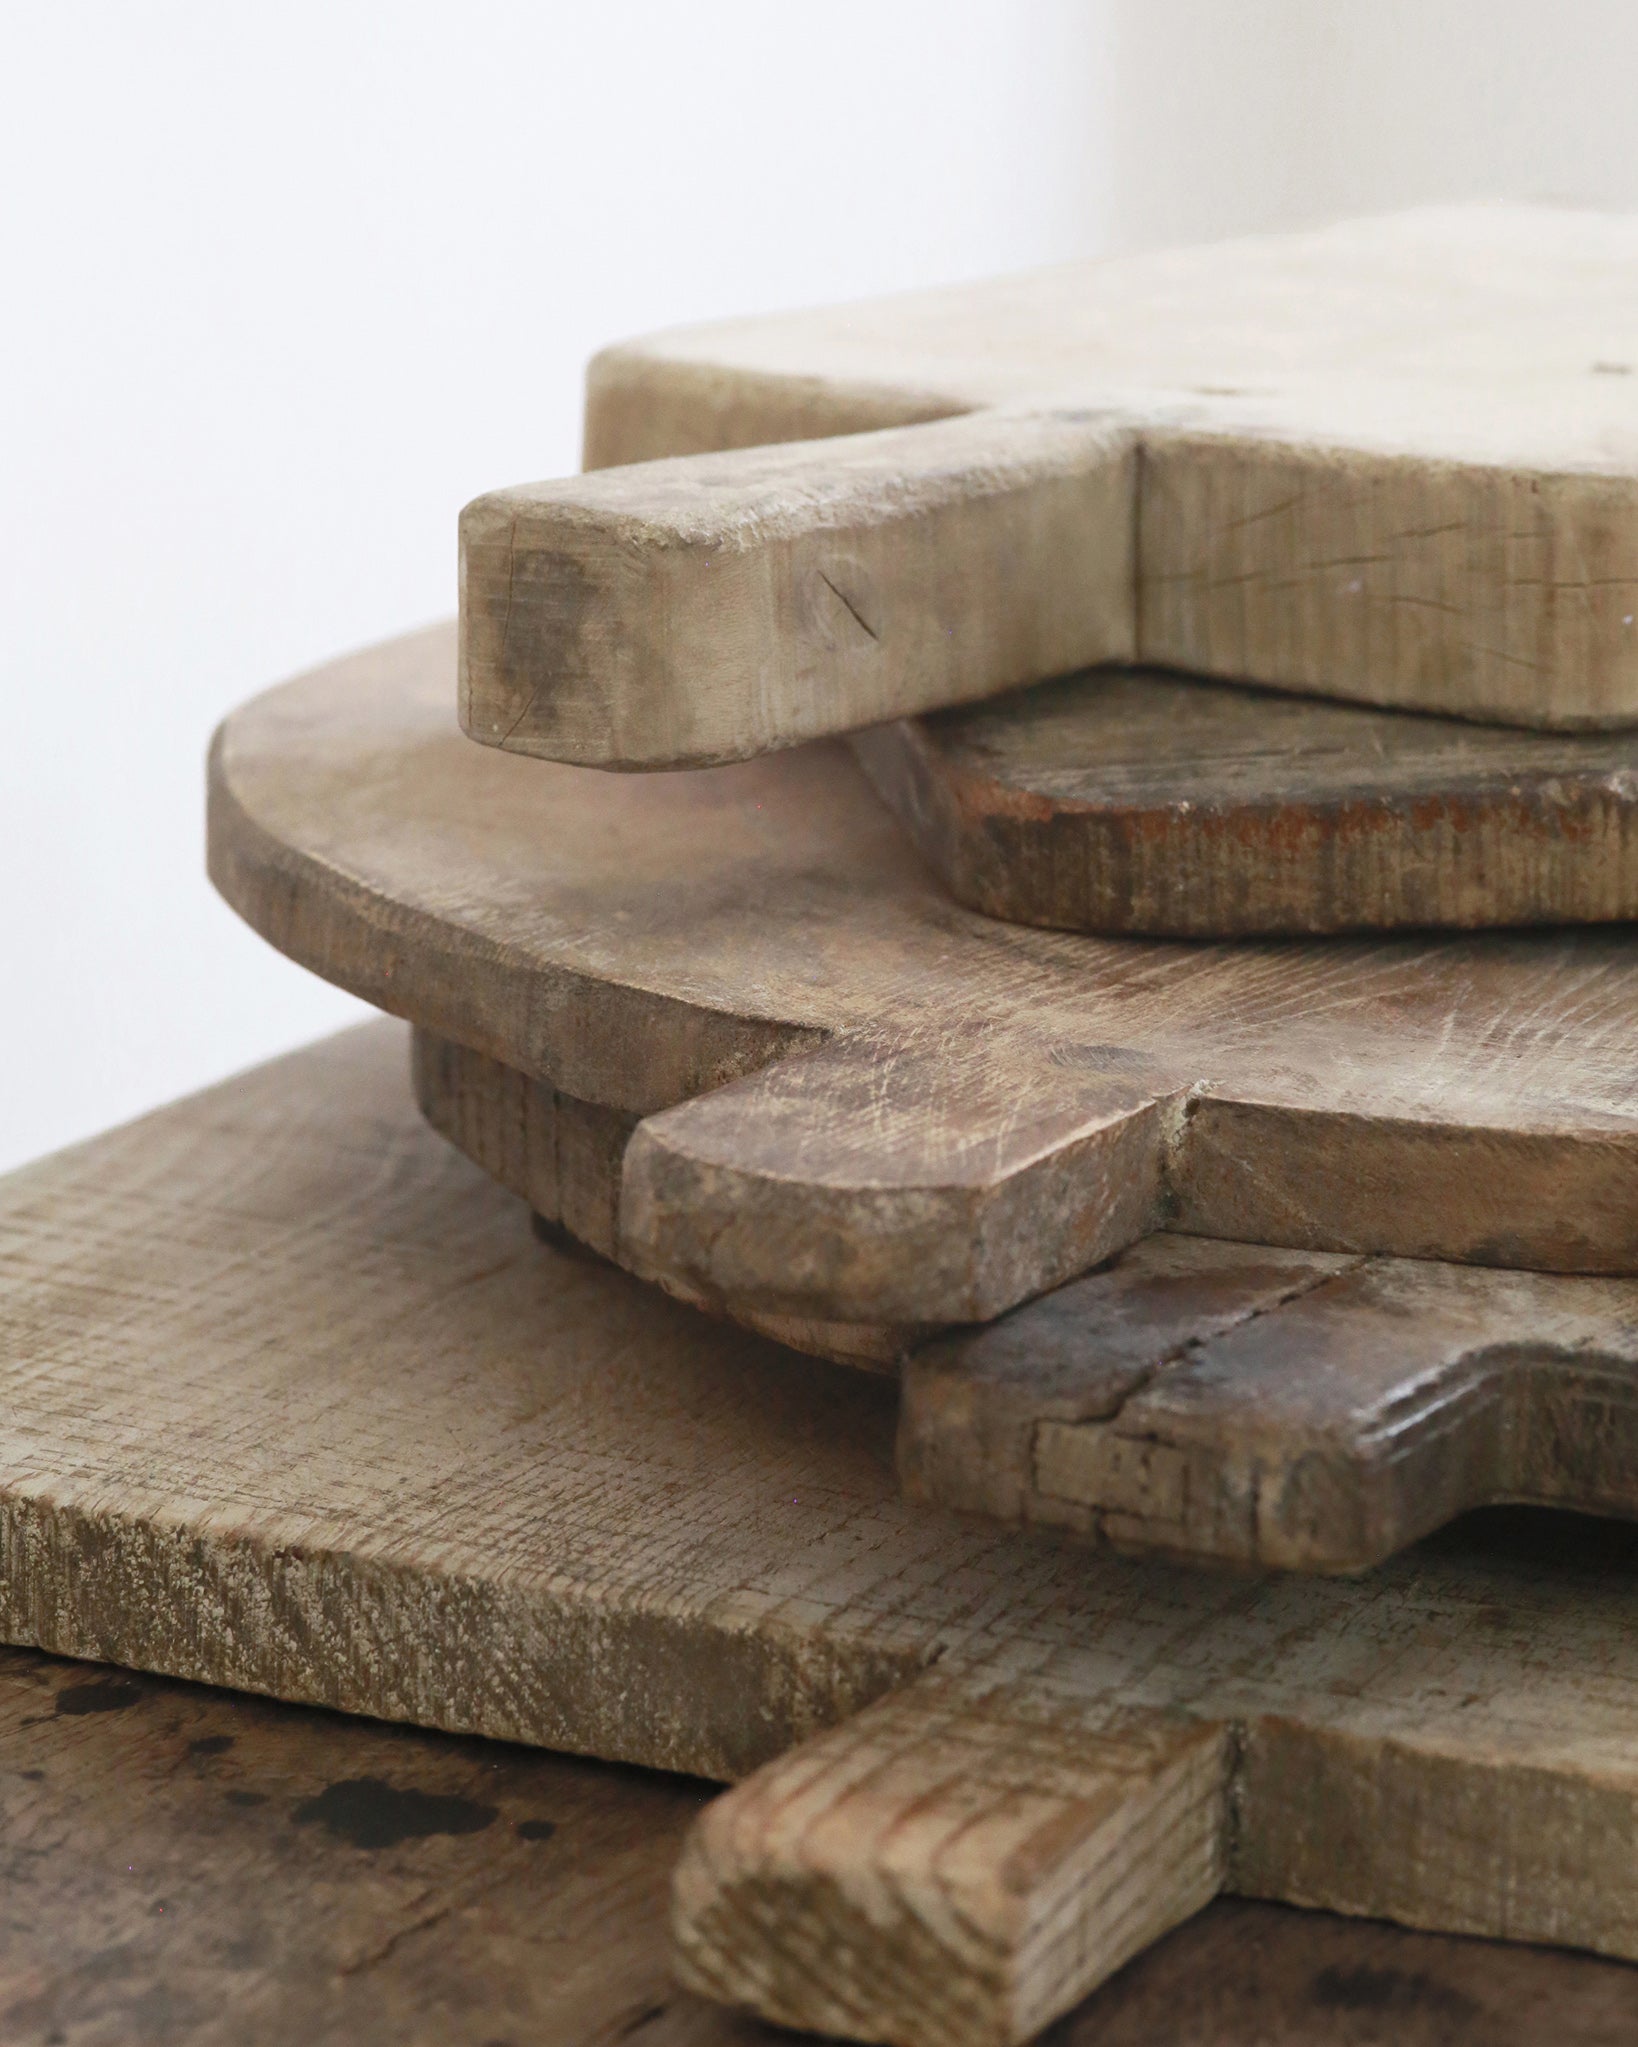 Stacked wooden chopping boards on worktop